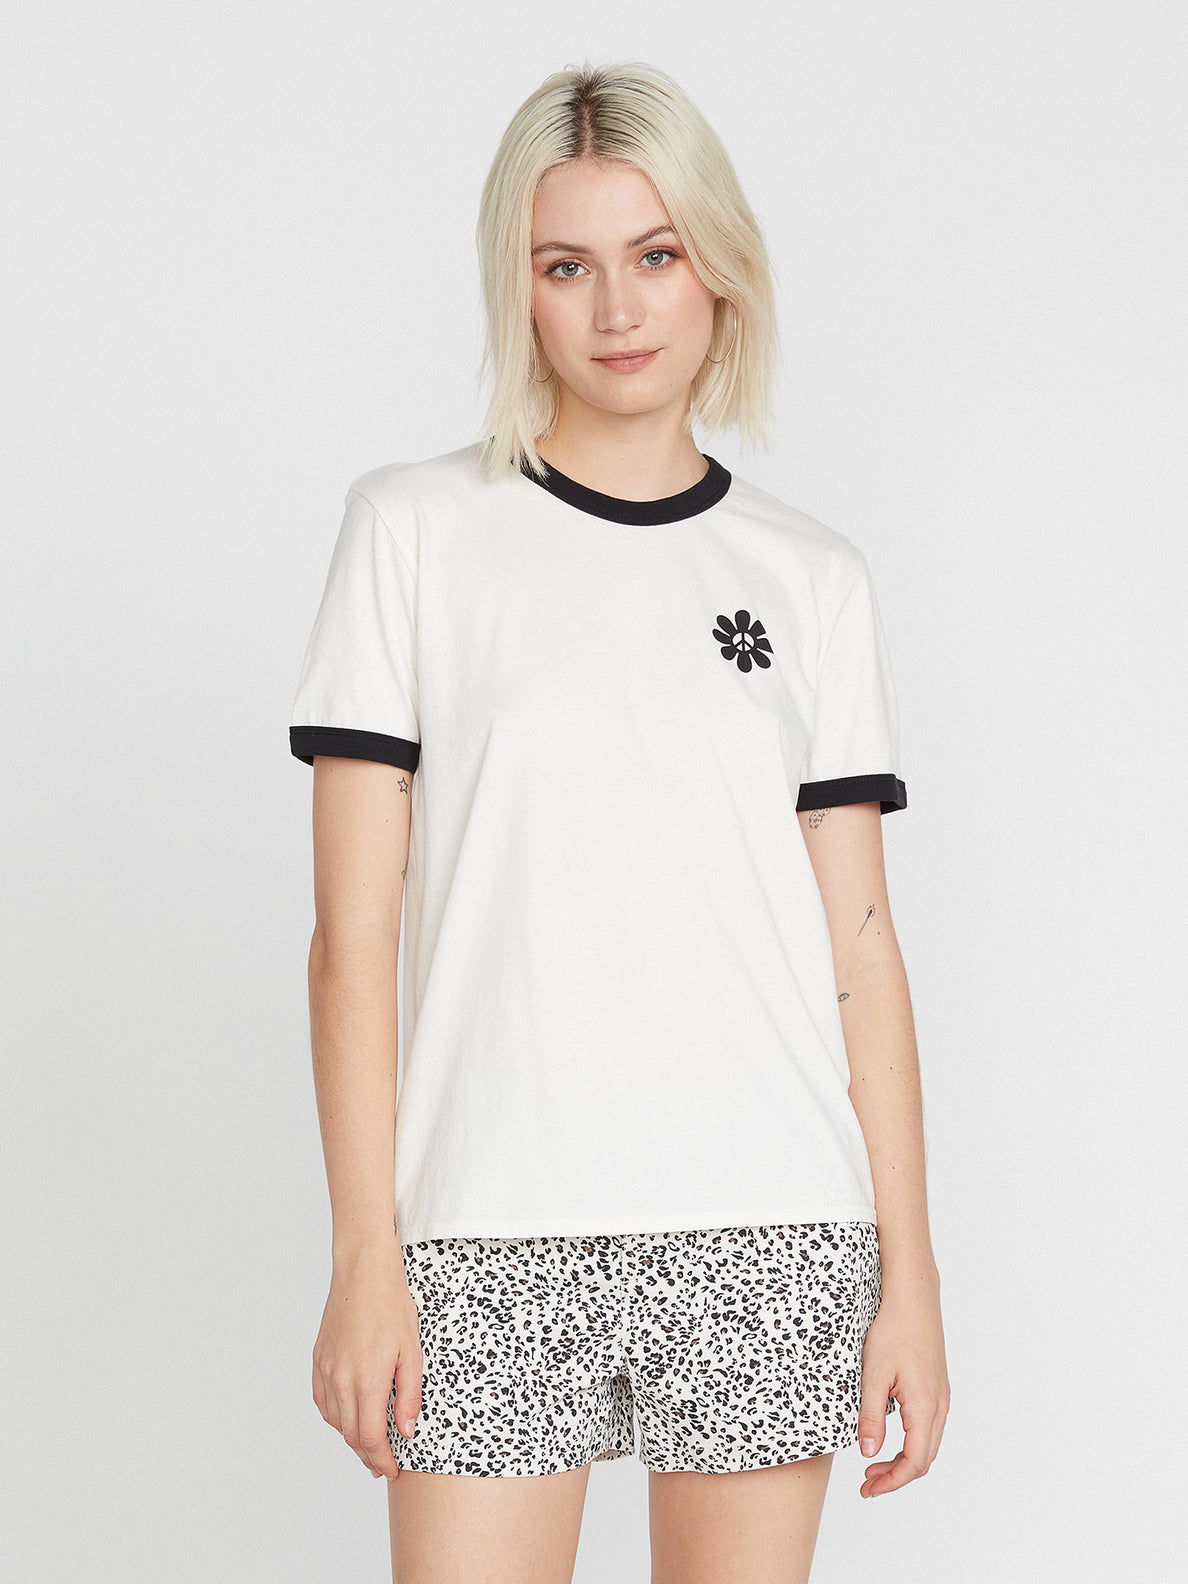 Truly Ringer Short Sleeve Tee - Star White (B3532202_SWH) [1]